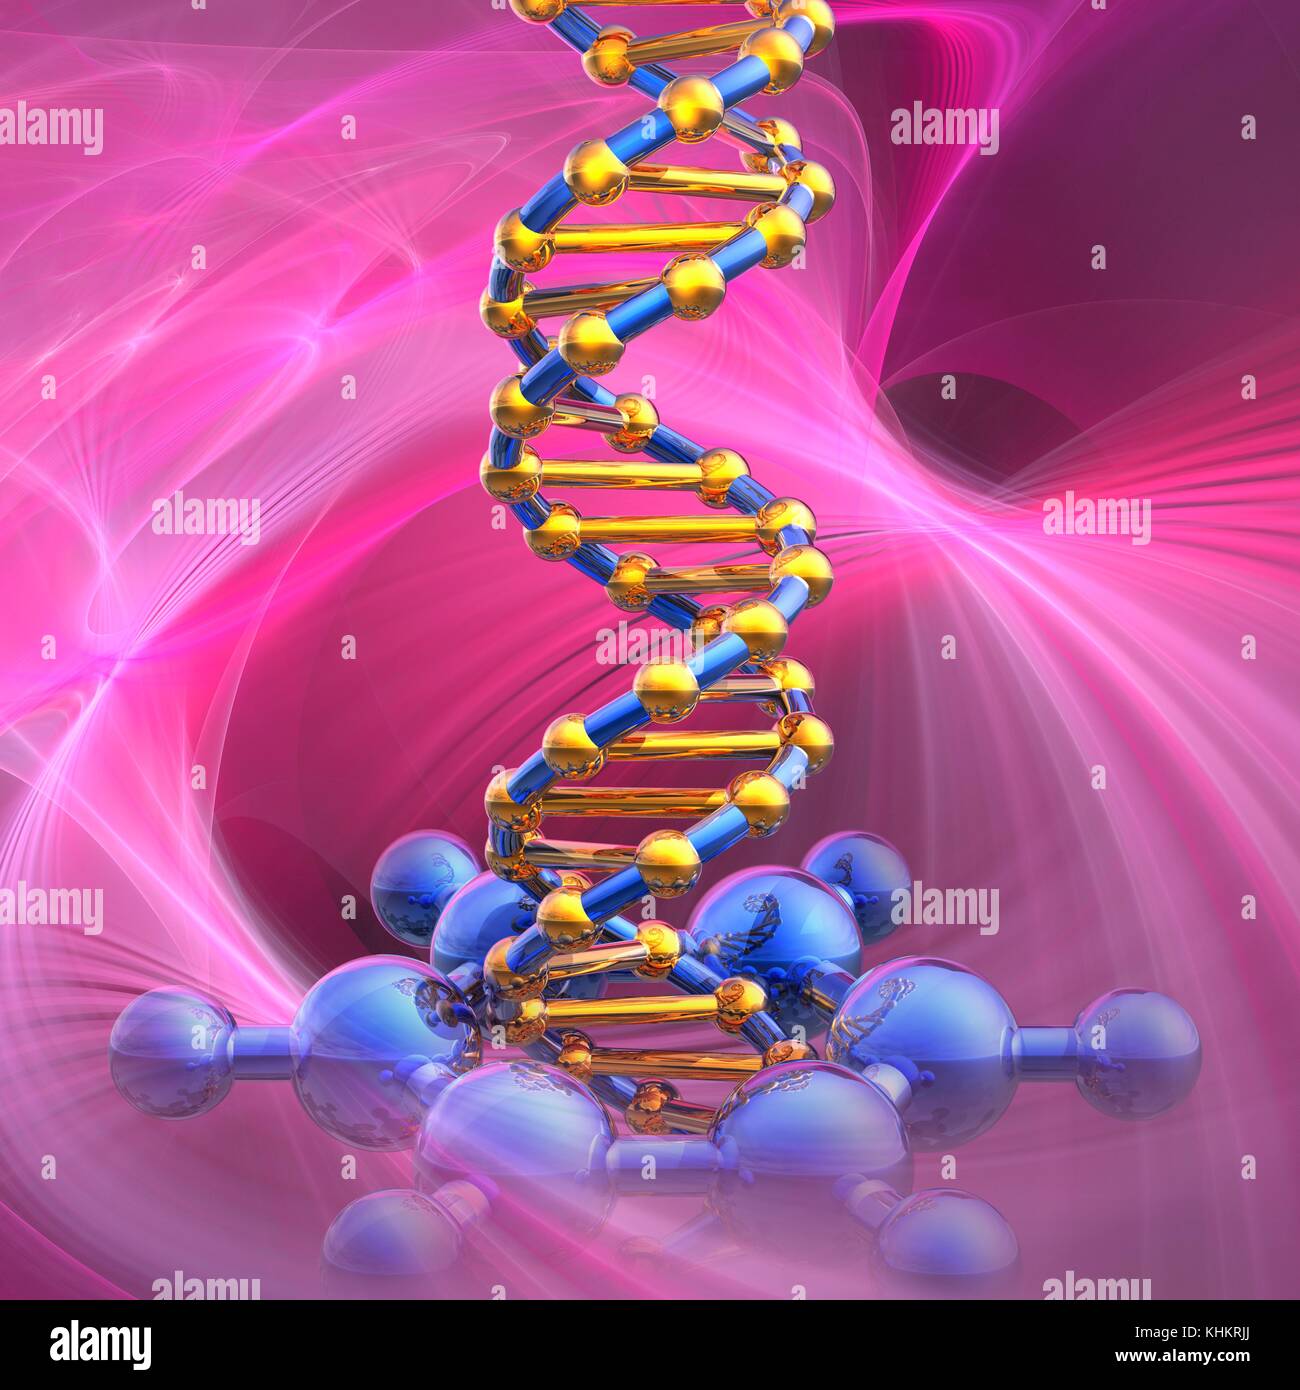 Conceptual illustration of a double stranded DNA (deoxyribonucleic acid) molecule being damaged by a benzene molecule. Benzene is a widely recognized human carcinogen (molecules not drawn to scale). DNA is composed of two strands twisted into a double helix. Each strand consists of a sugar-phosphate backbone attached to nucleotide bases. There are four bases: adenine, cytosine, guanine and thymine. The bases are joined together by hydrogen bonds. DNA contains sections called genes that encode the body's genetic information. Stock Photo